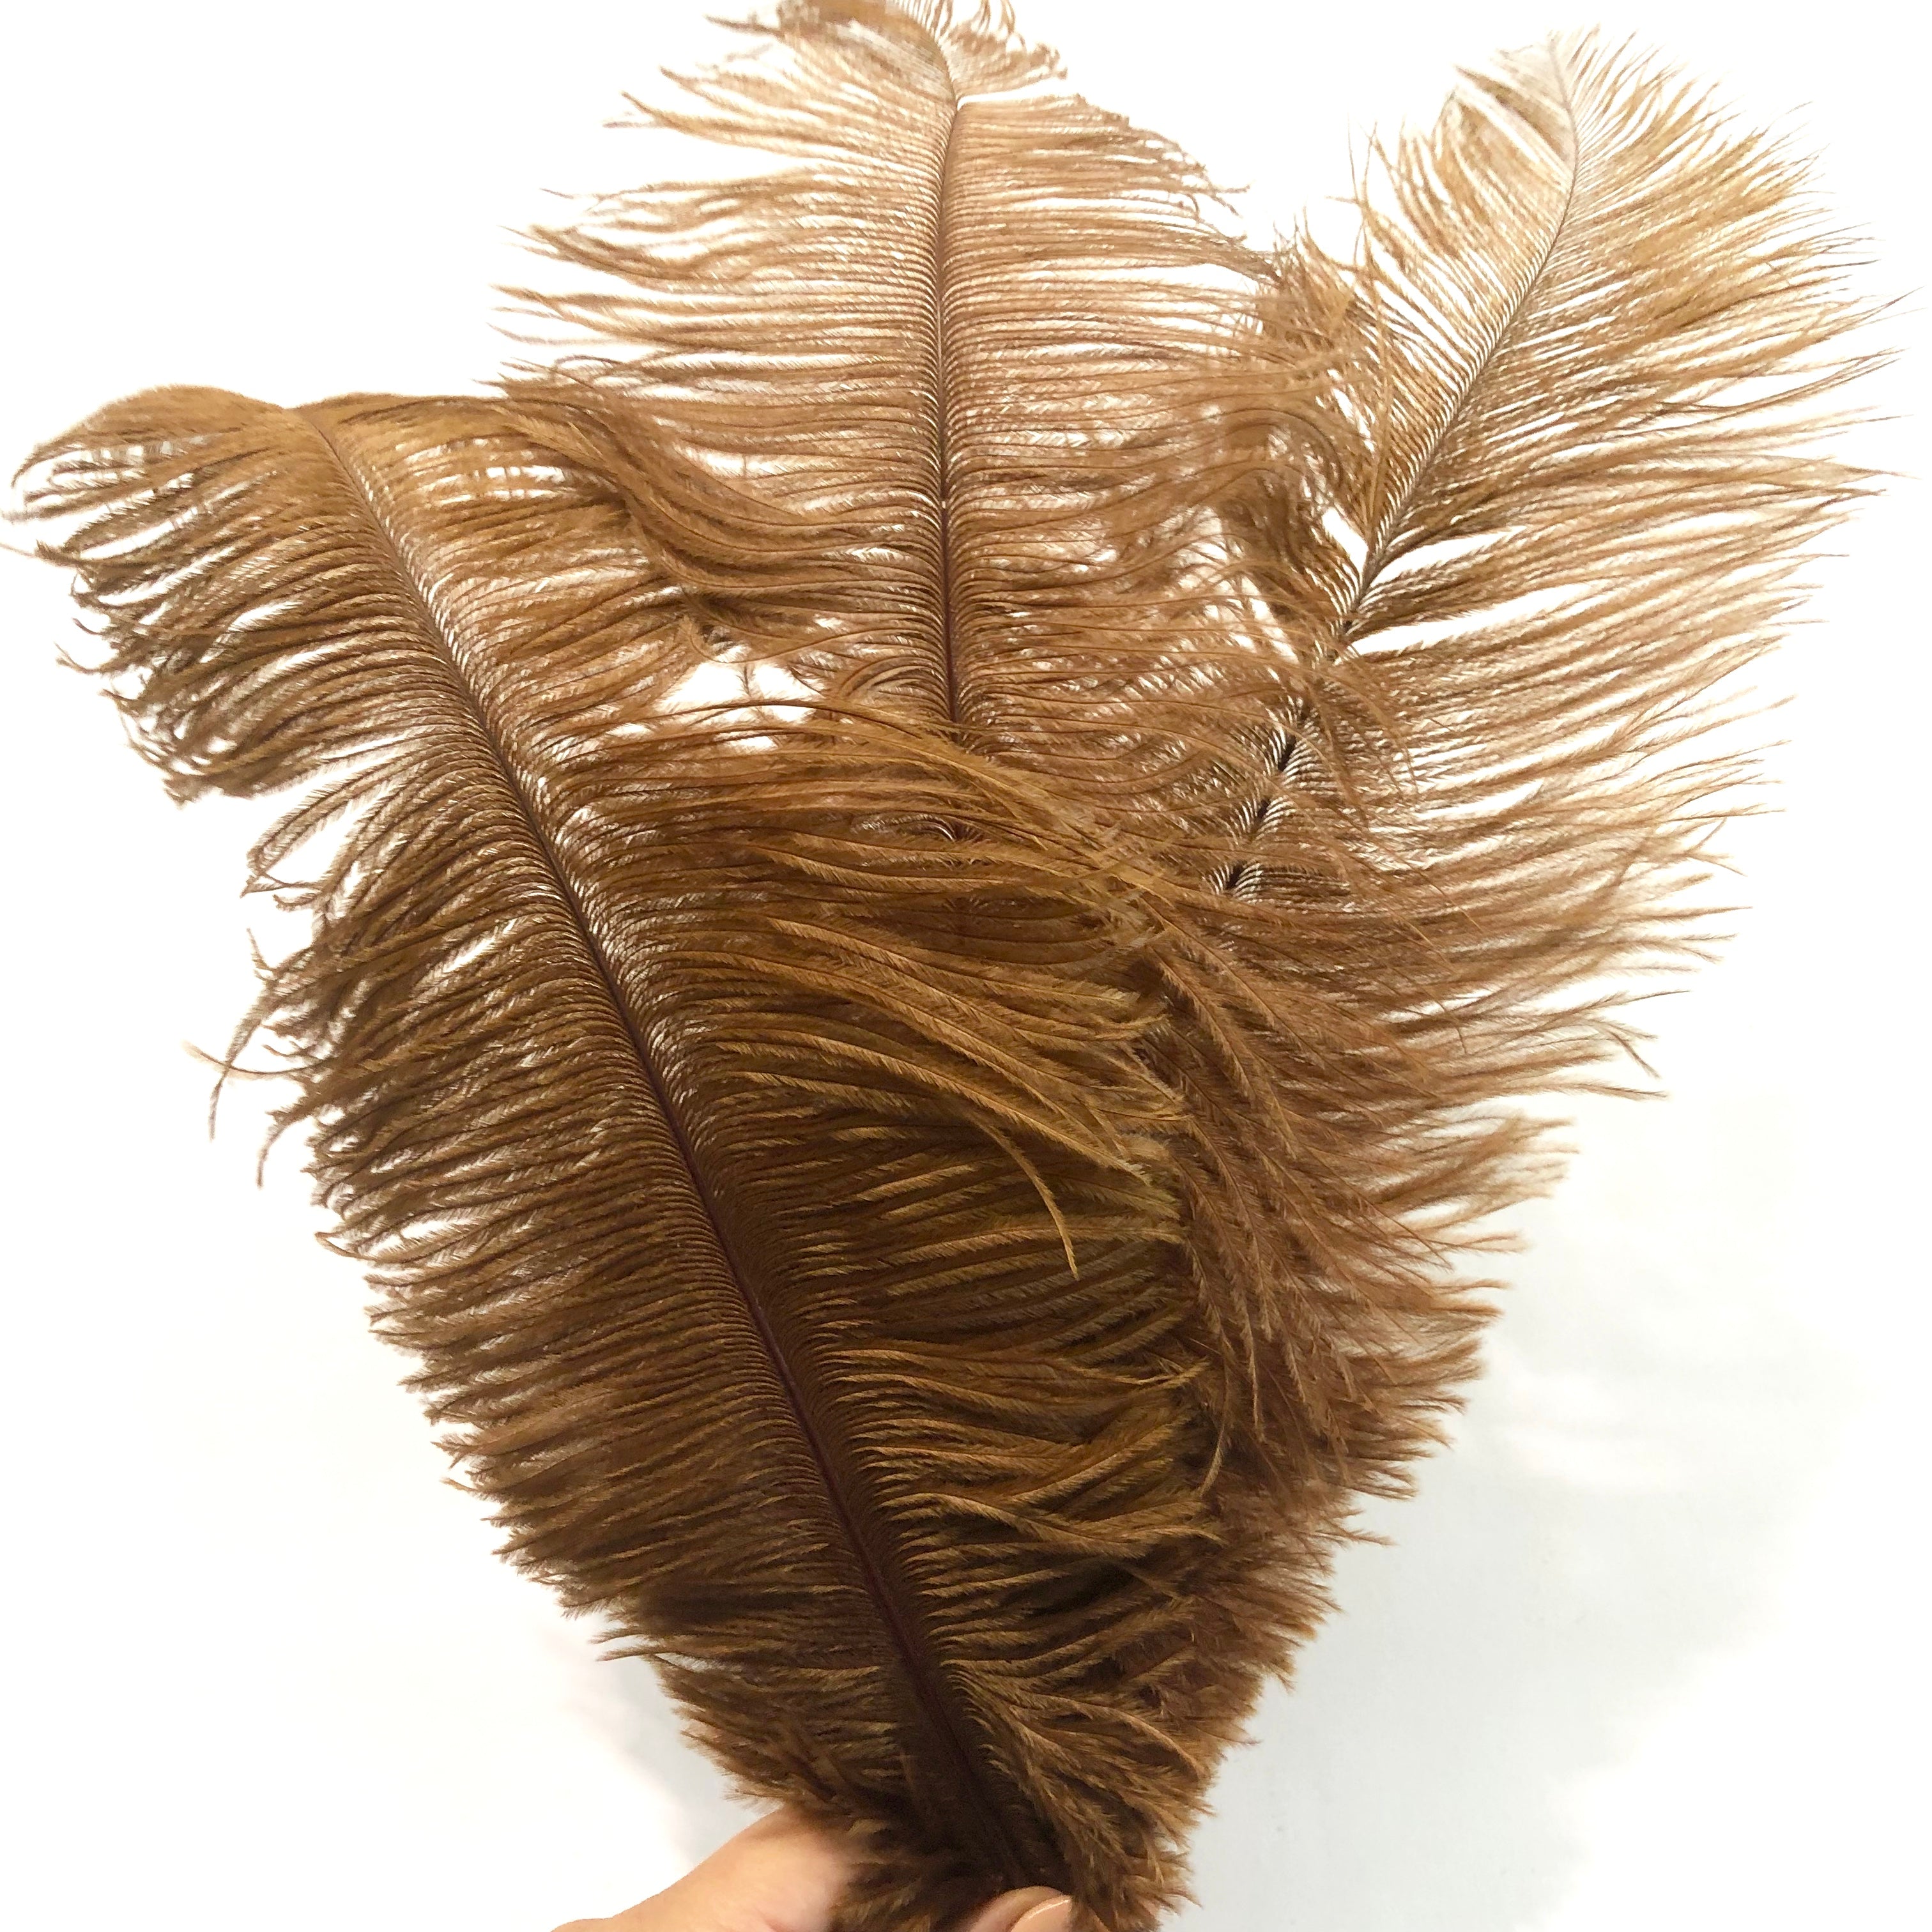 Ostrich Drab Feather 27-32cm - Rust Brown *Seconds* Pack of 5